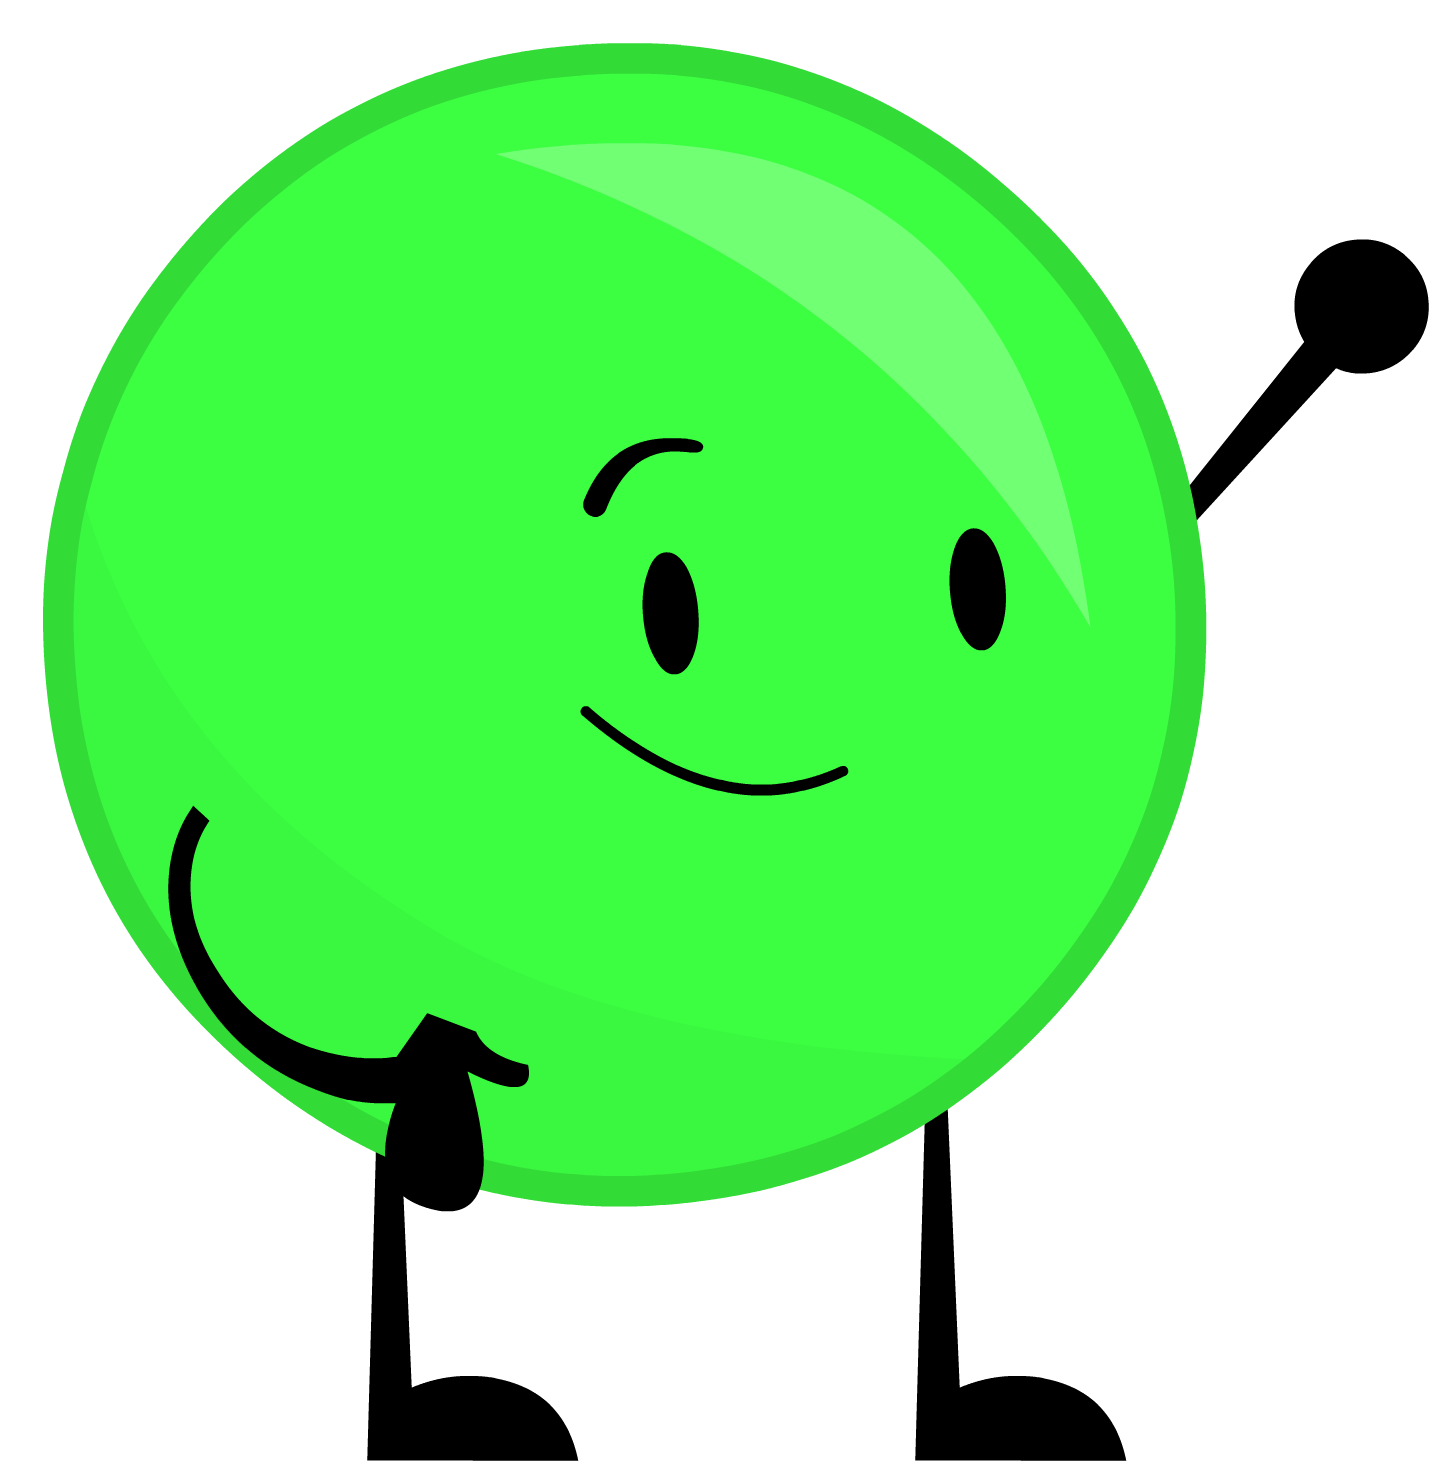 Peas clipart green object. Image pea png shows